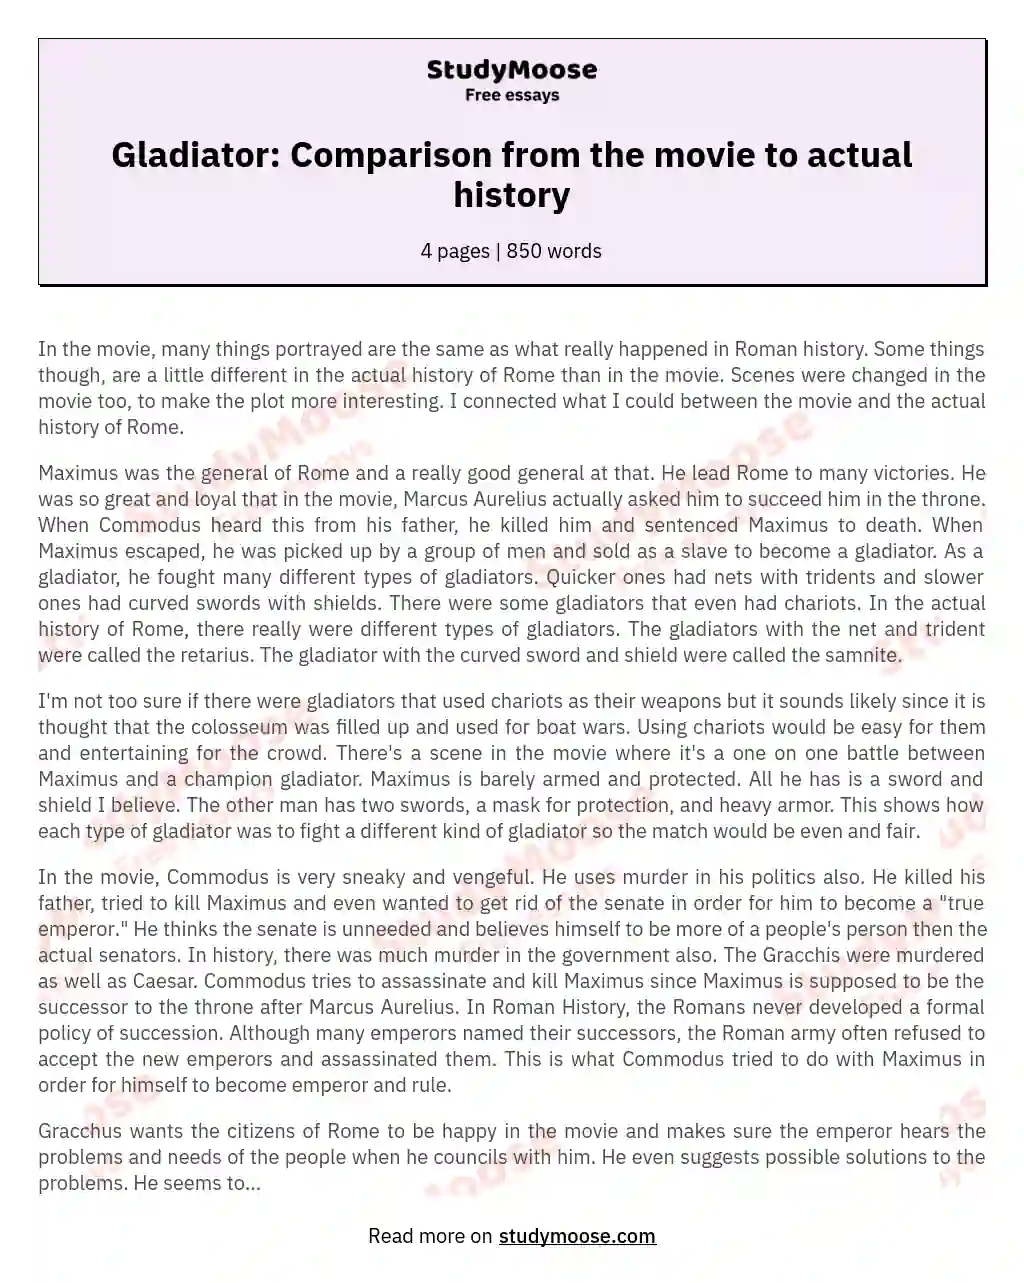 Gladiator: Comparison from the movie to actual history essay